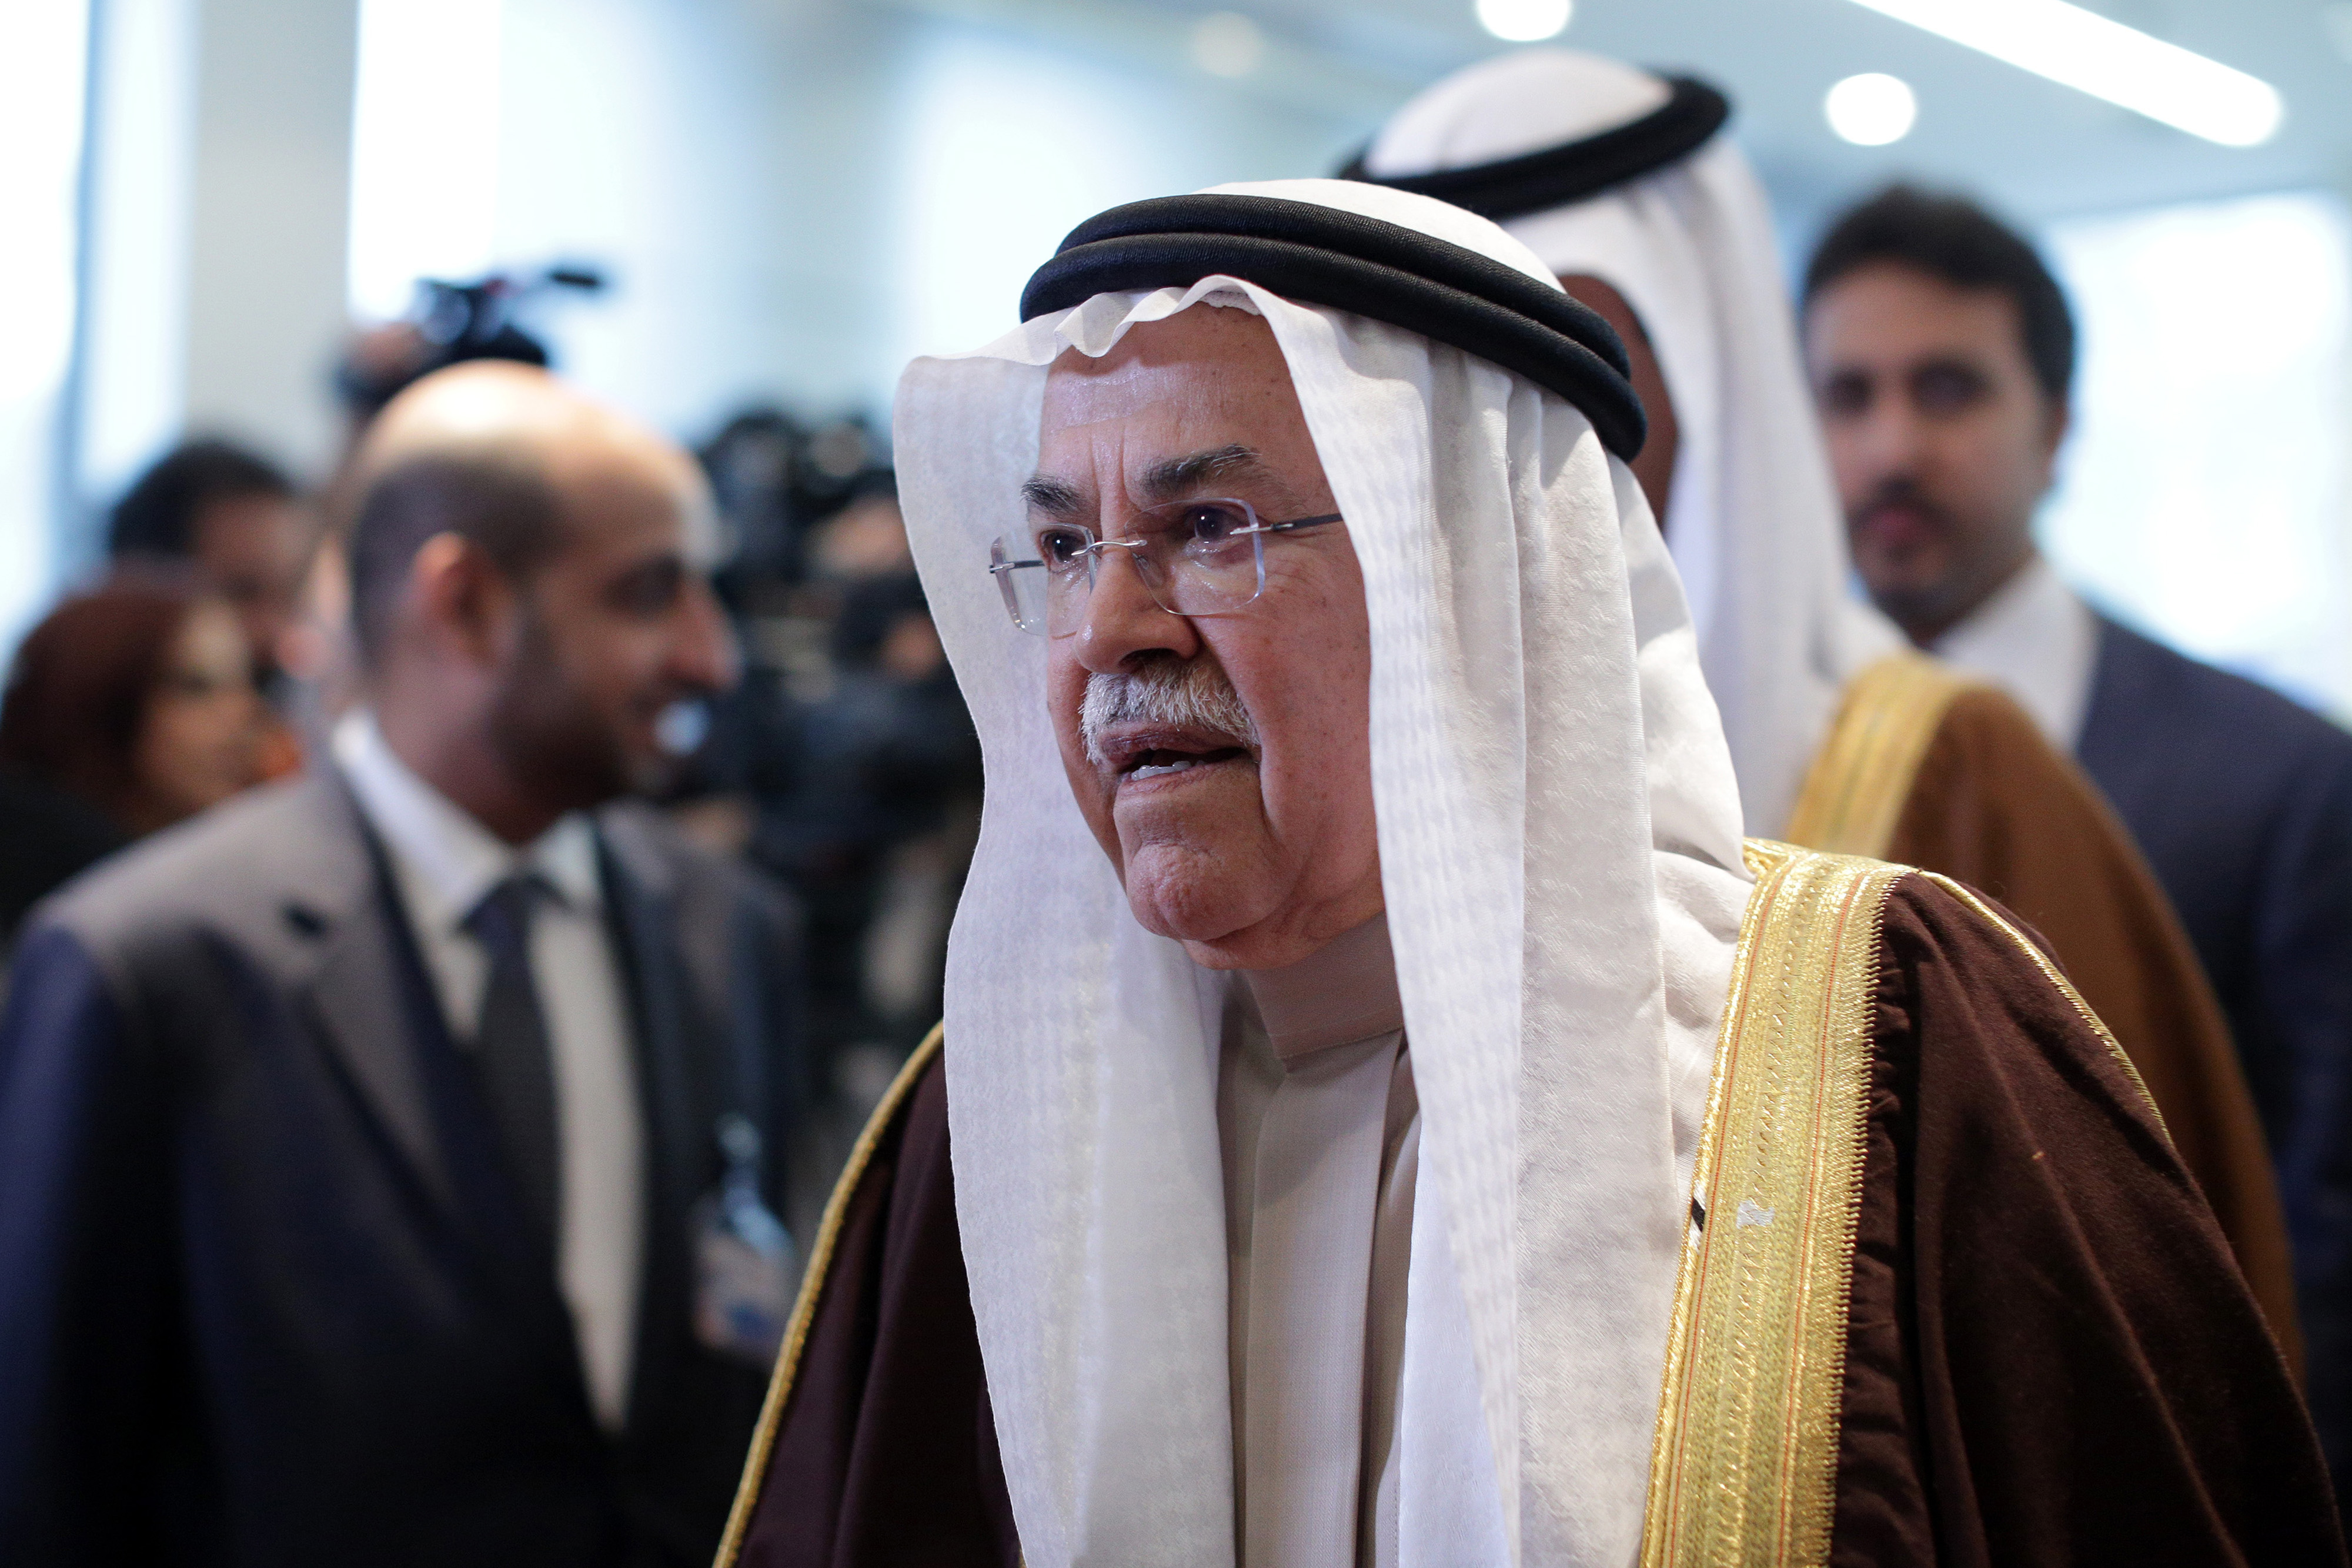 Ali Bin Ibrahim al-Naimi, Saudi Arabia's petroleum and mineral resources minister, at the 168th Organization of Petroleum Exporting Countries (OPEC) meeting in Vienna on Dec. 4, 2015. (Lisi Niesner—Bloomberg via Getty Images)